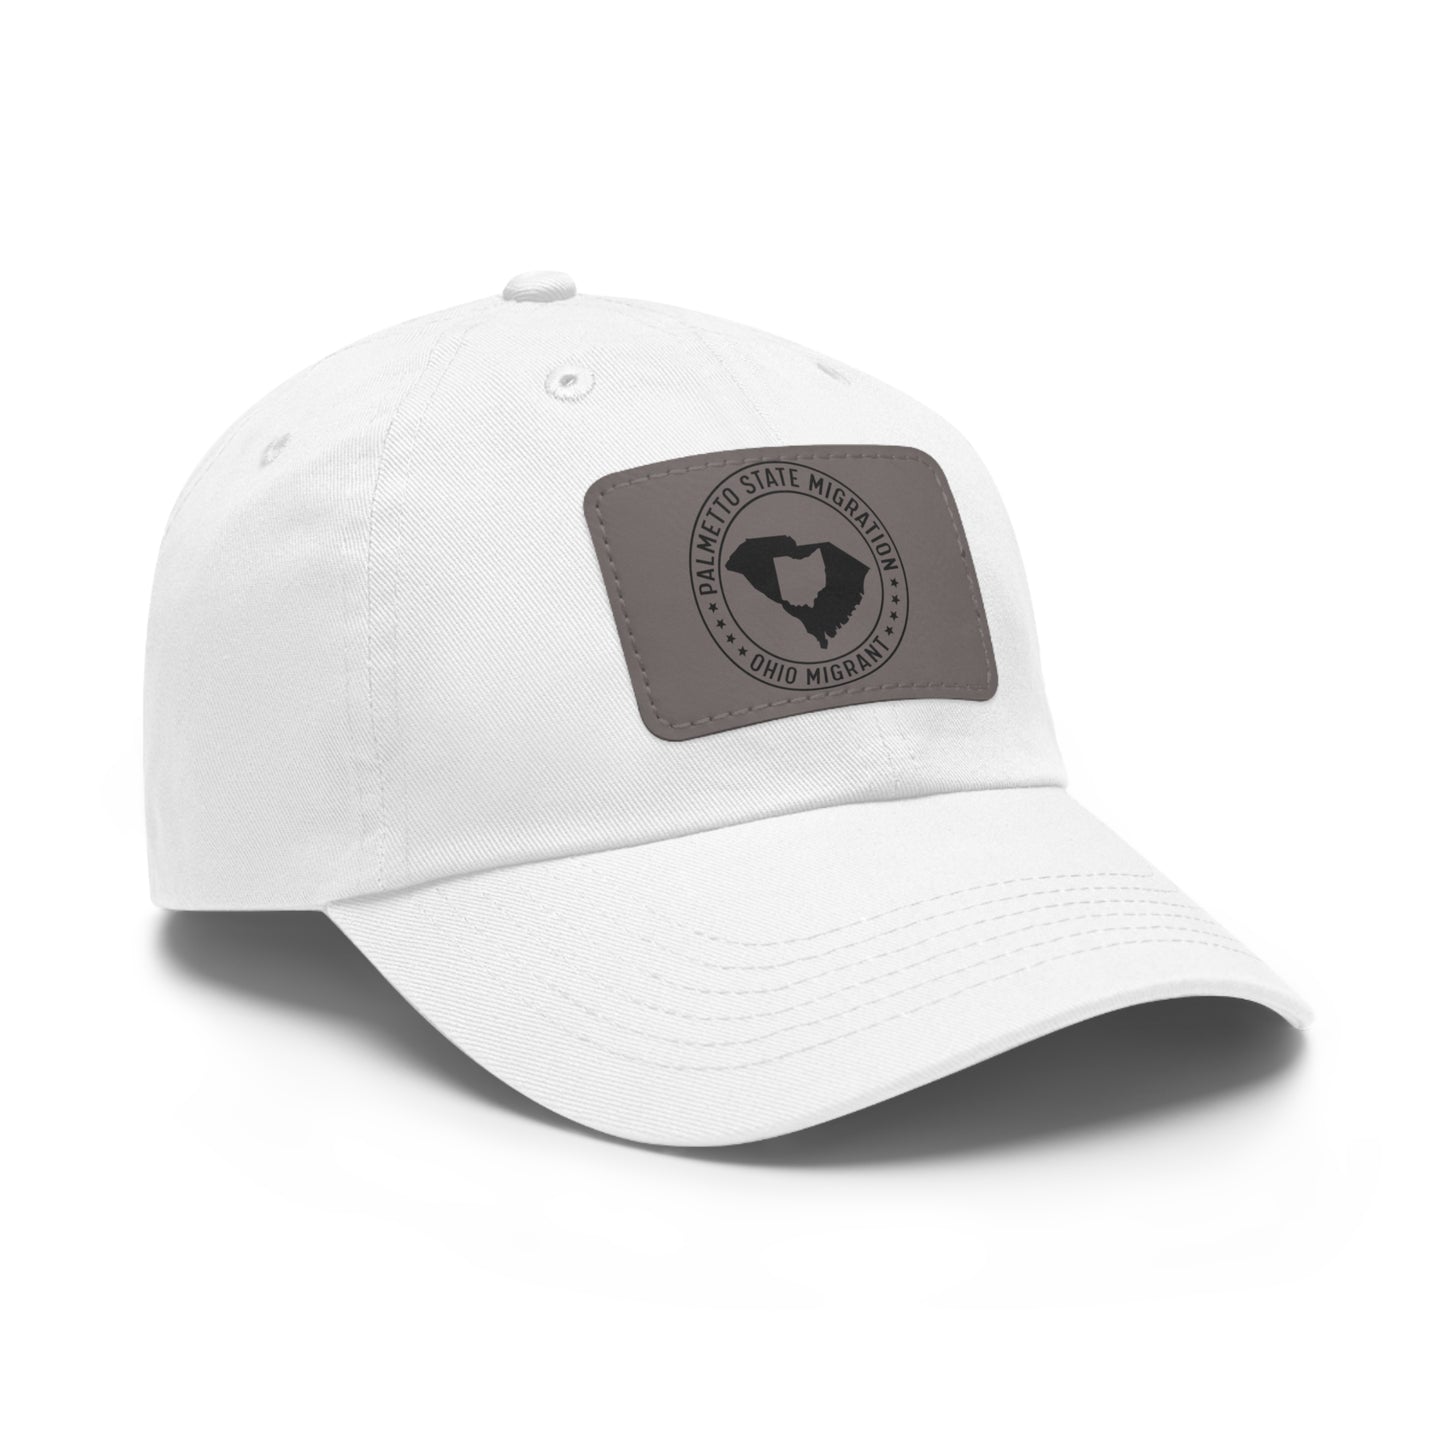 Ohio Migrant Dad Hat with Leather Patch